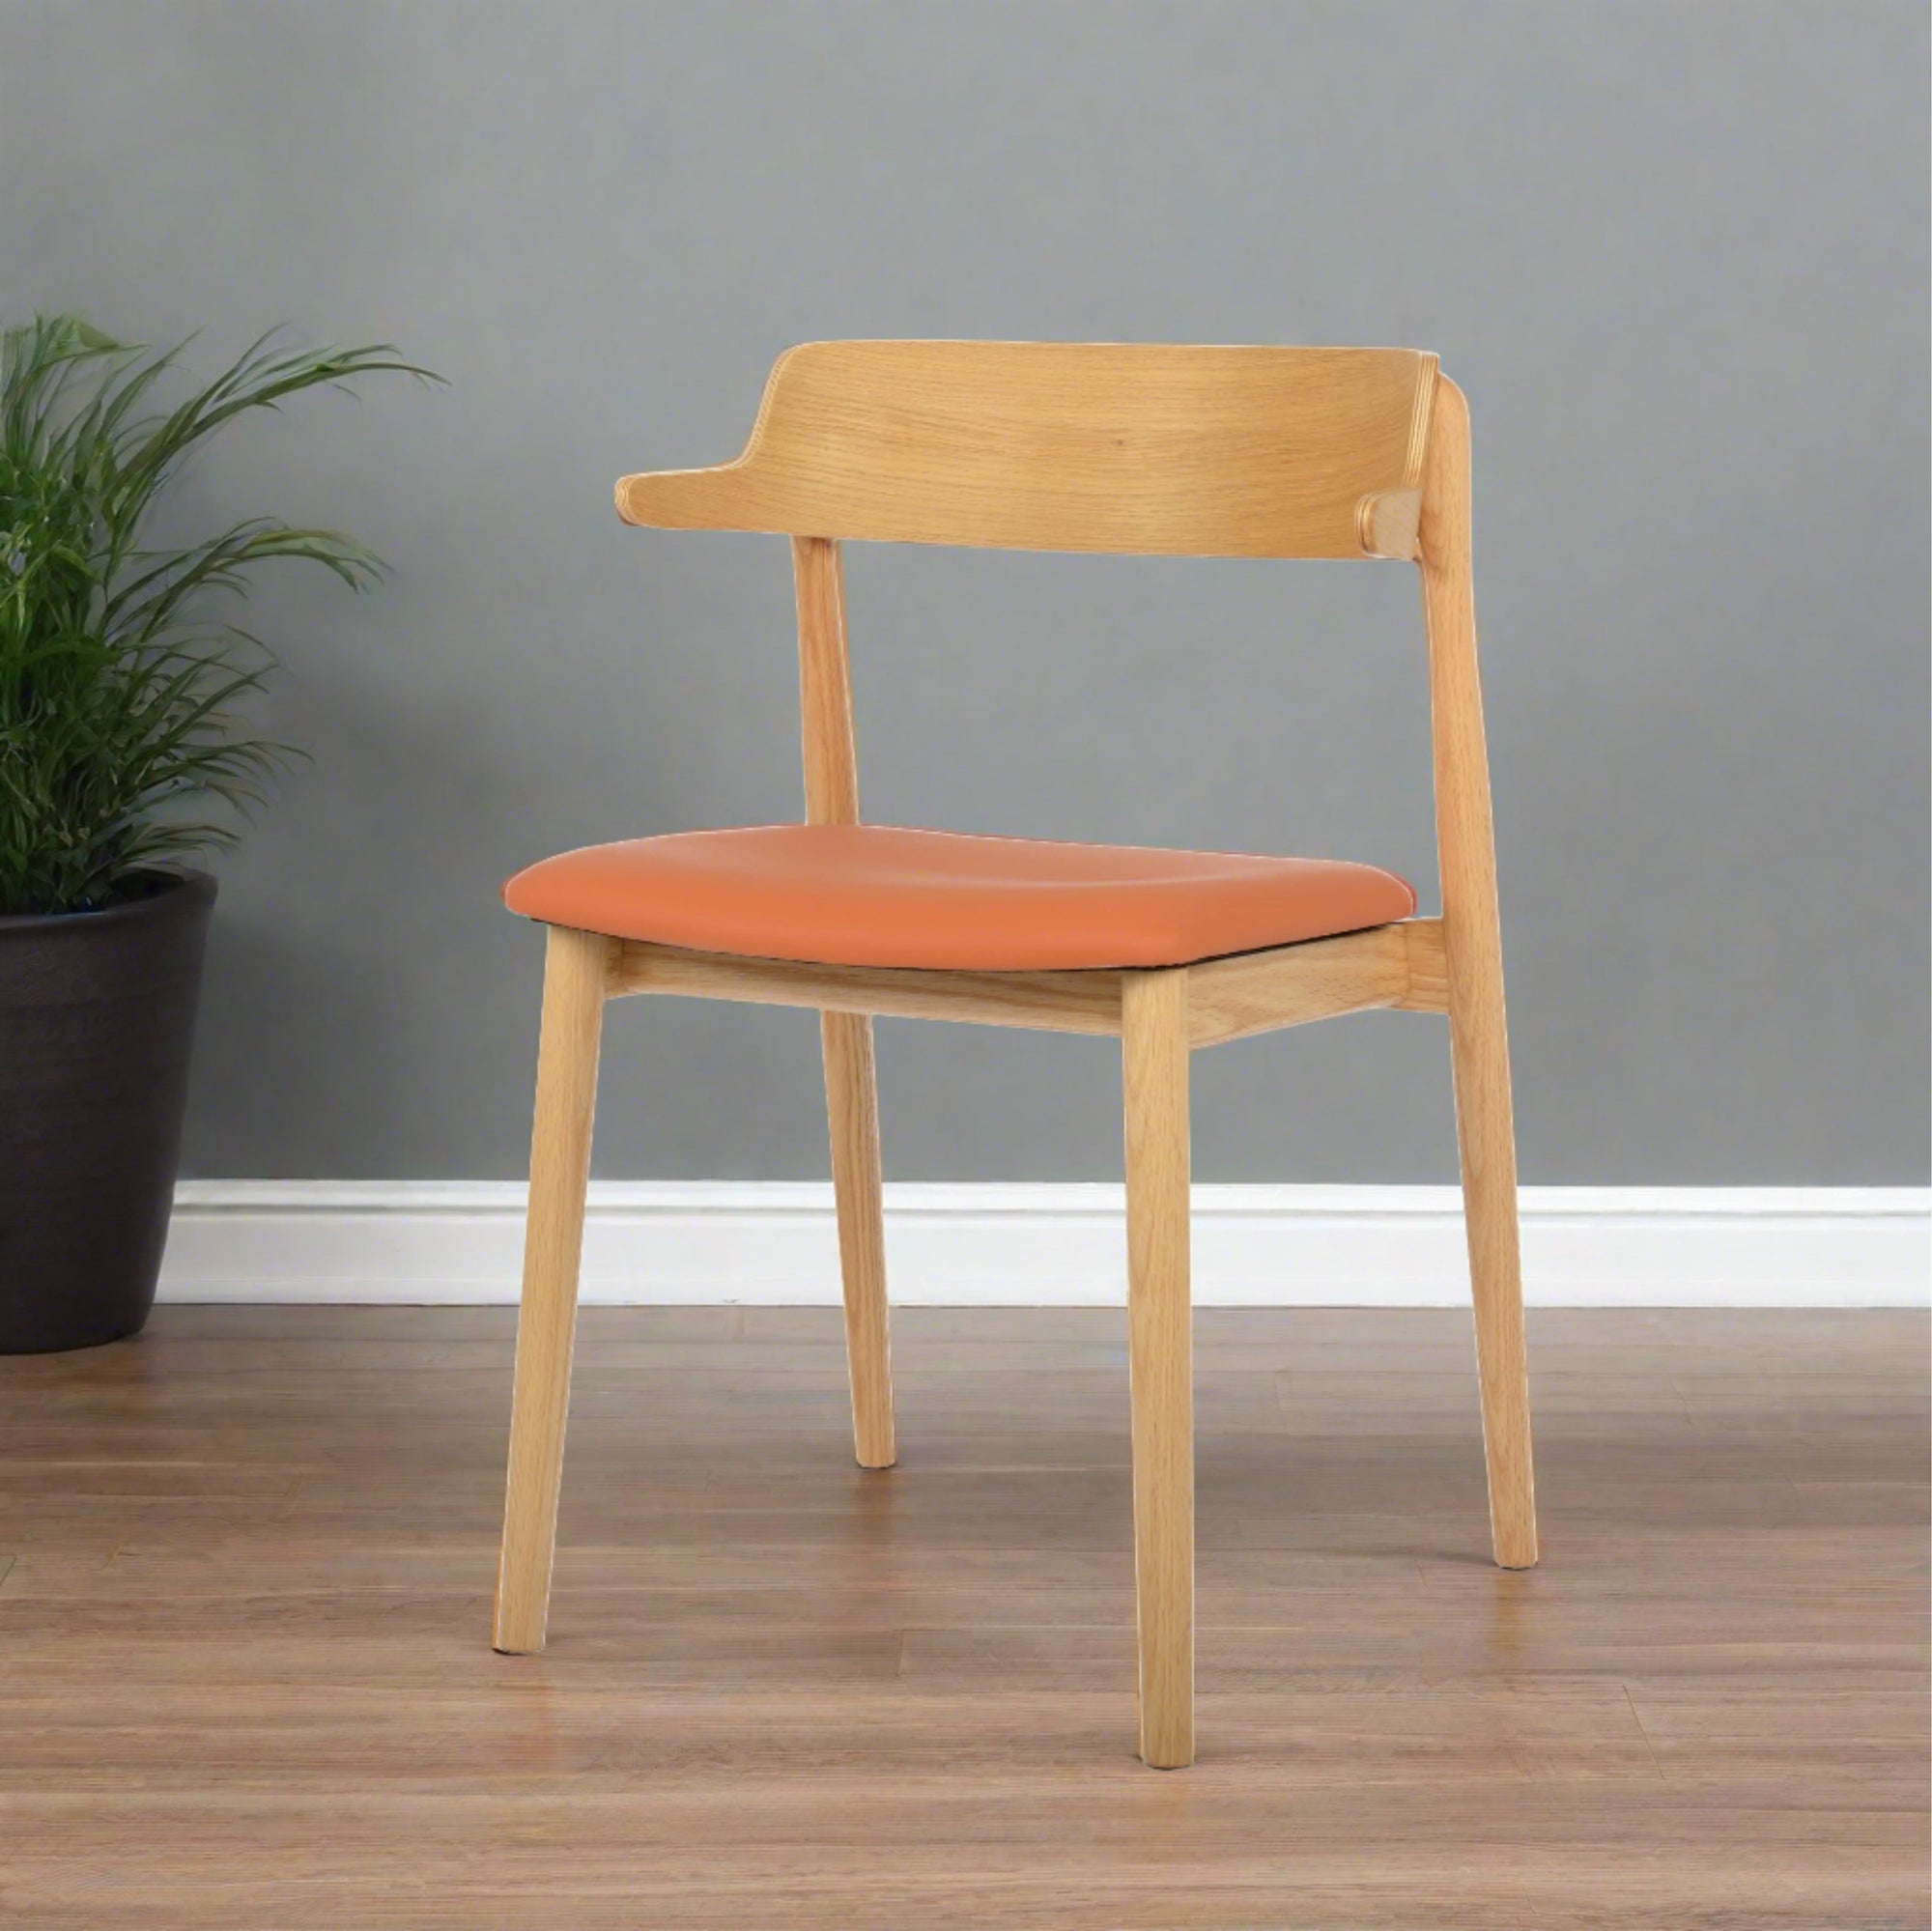 Custom Solid Wood Dining Chair - CH7242B picket and rail